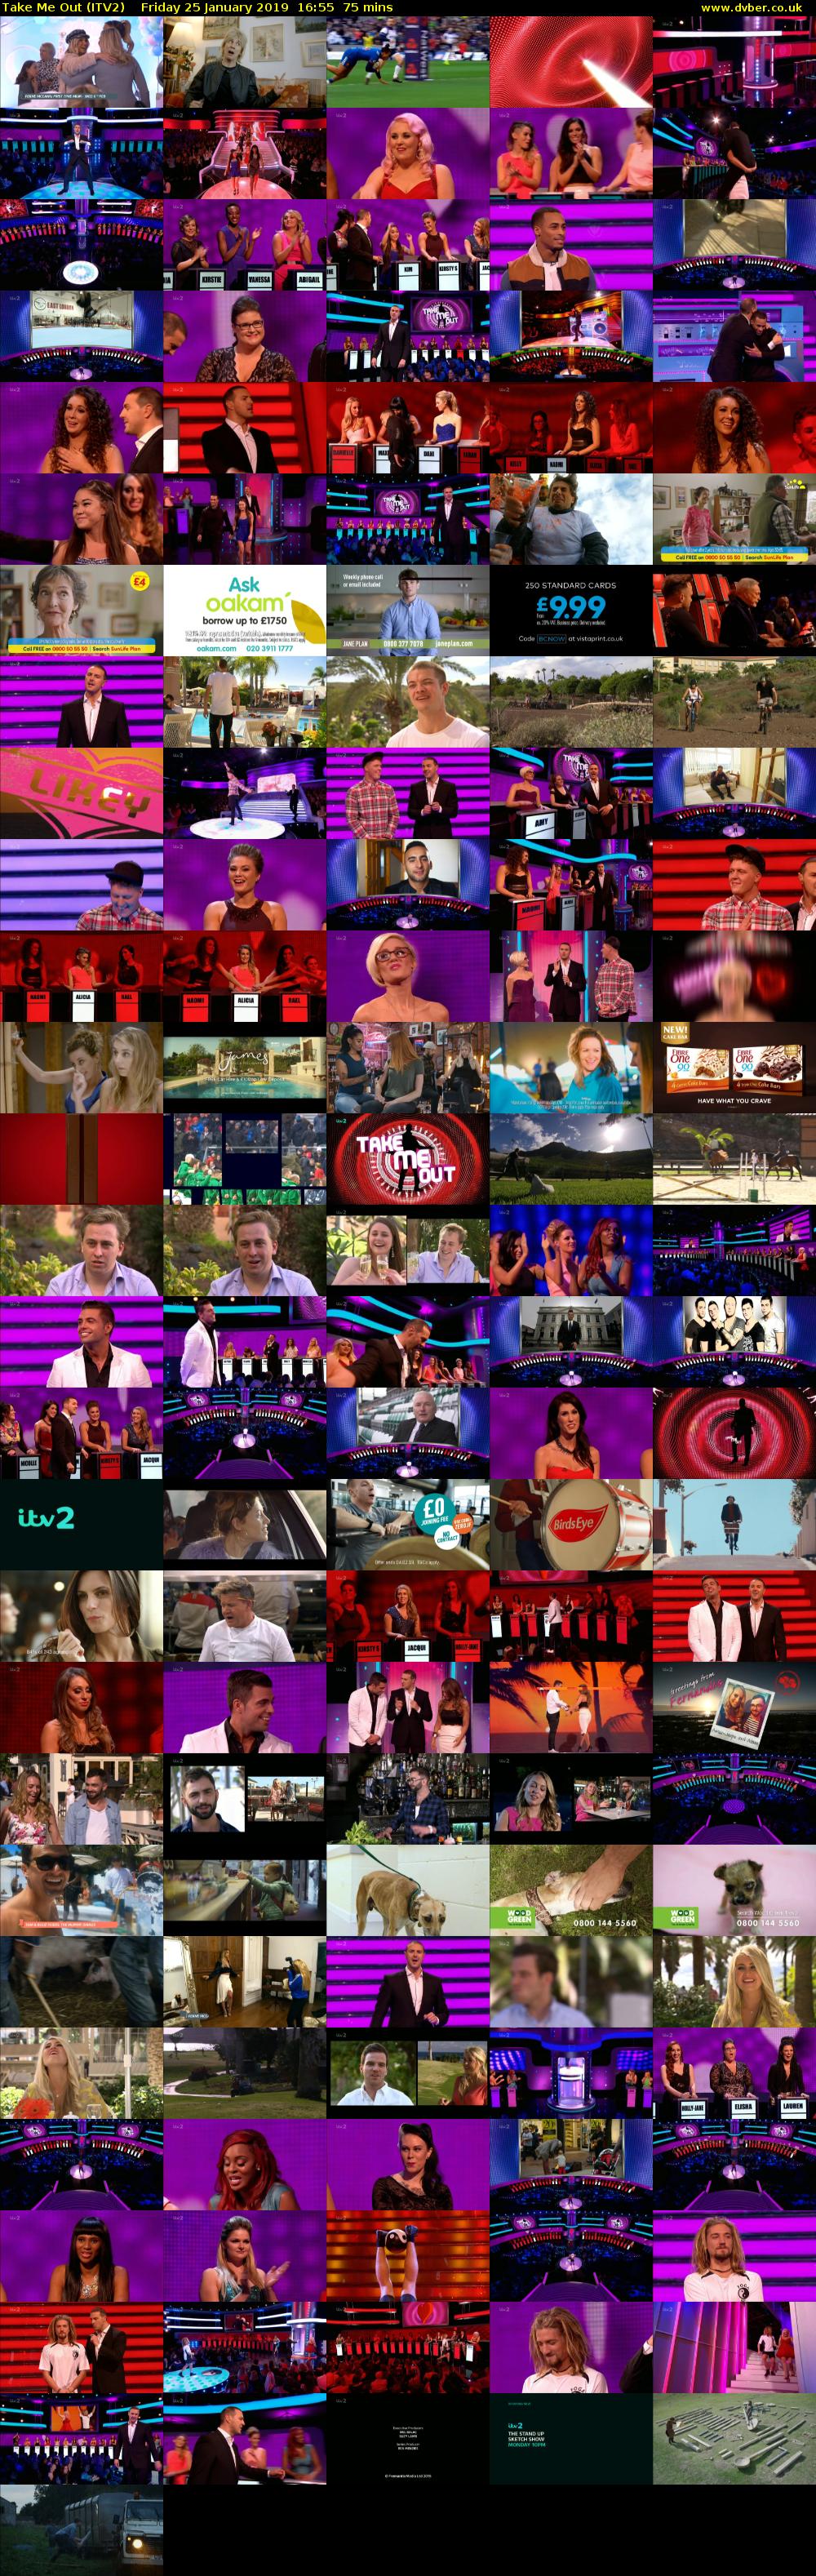 Take Me Out (ITV2) Friday 25 January 2019 16:55 - 18:10